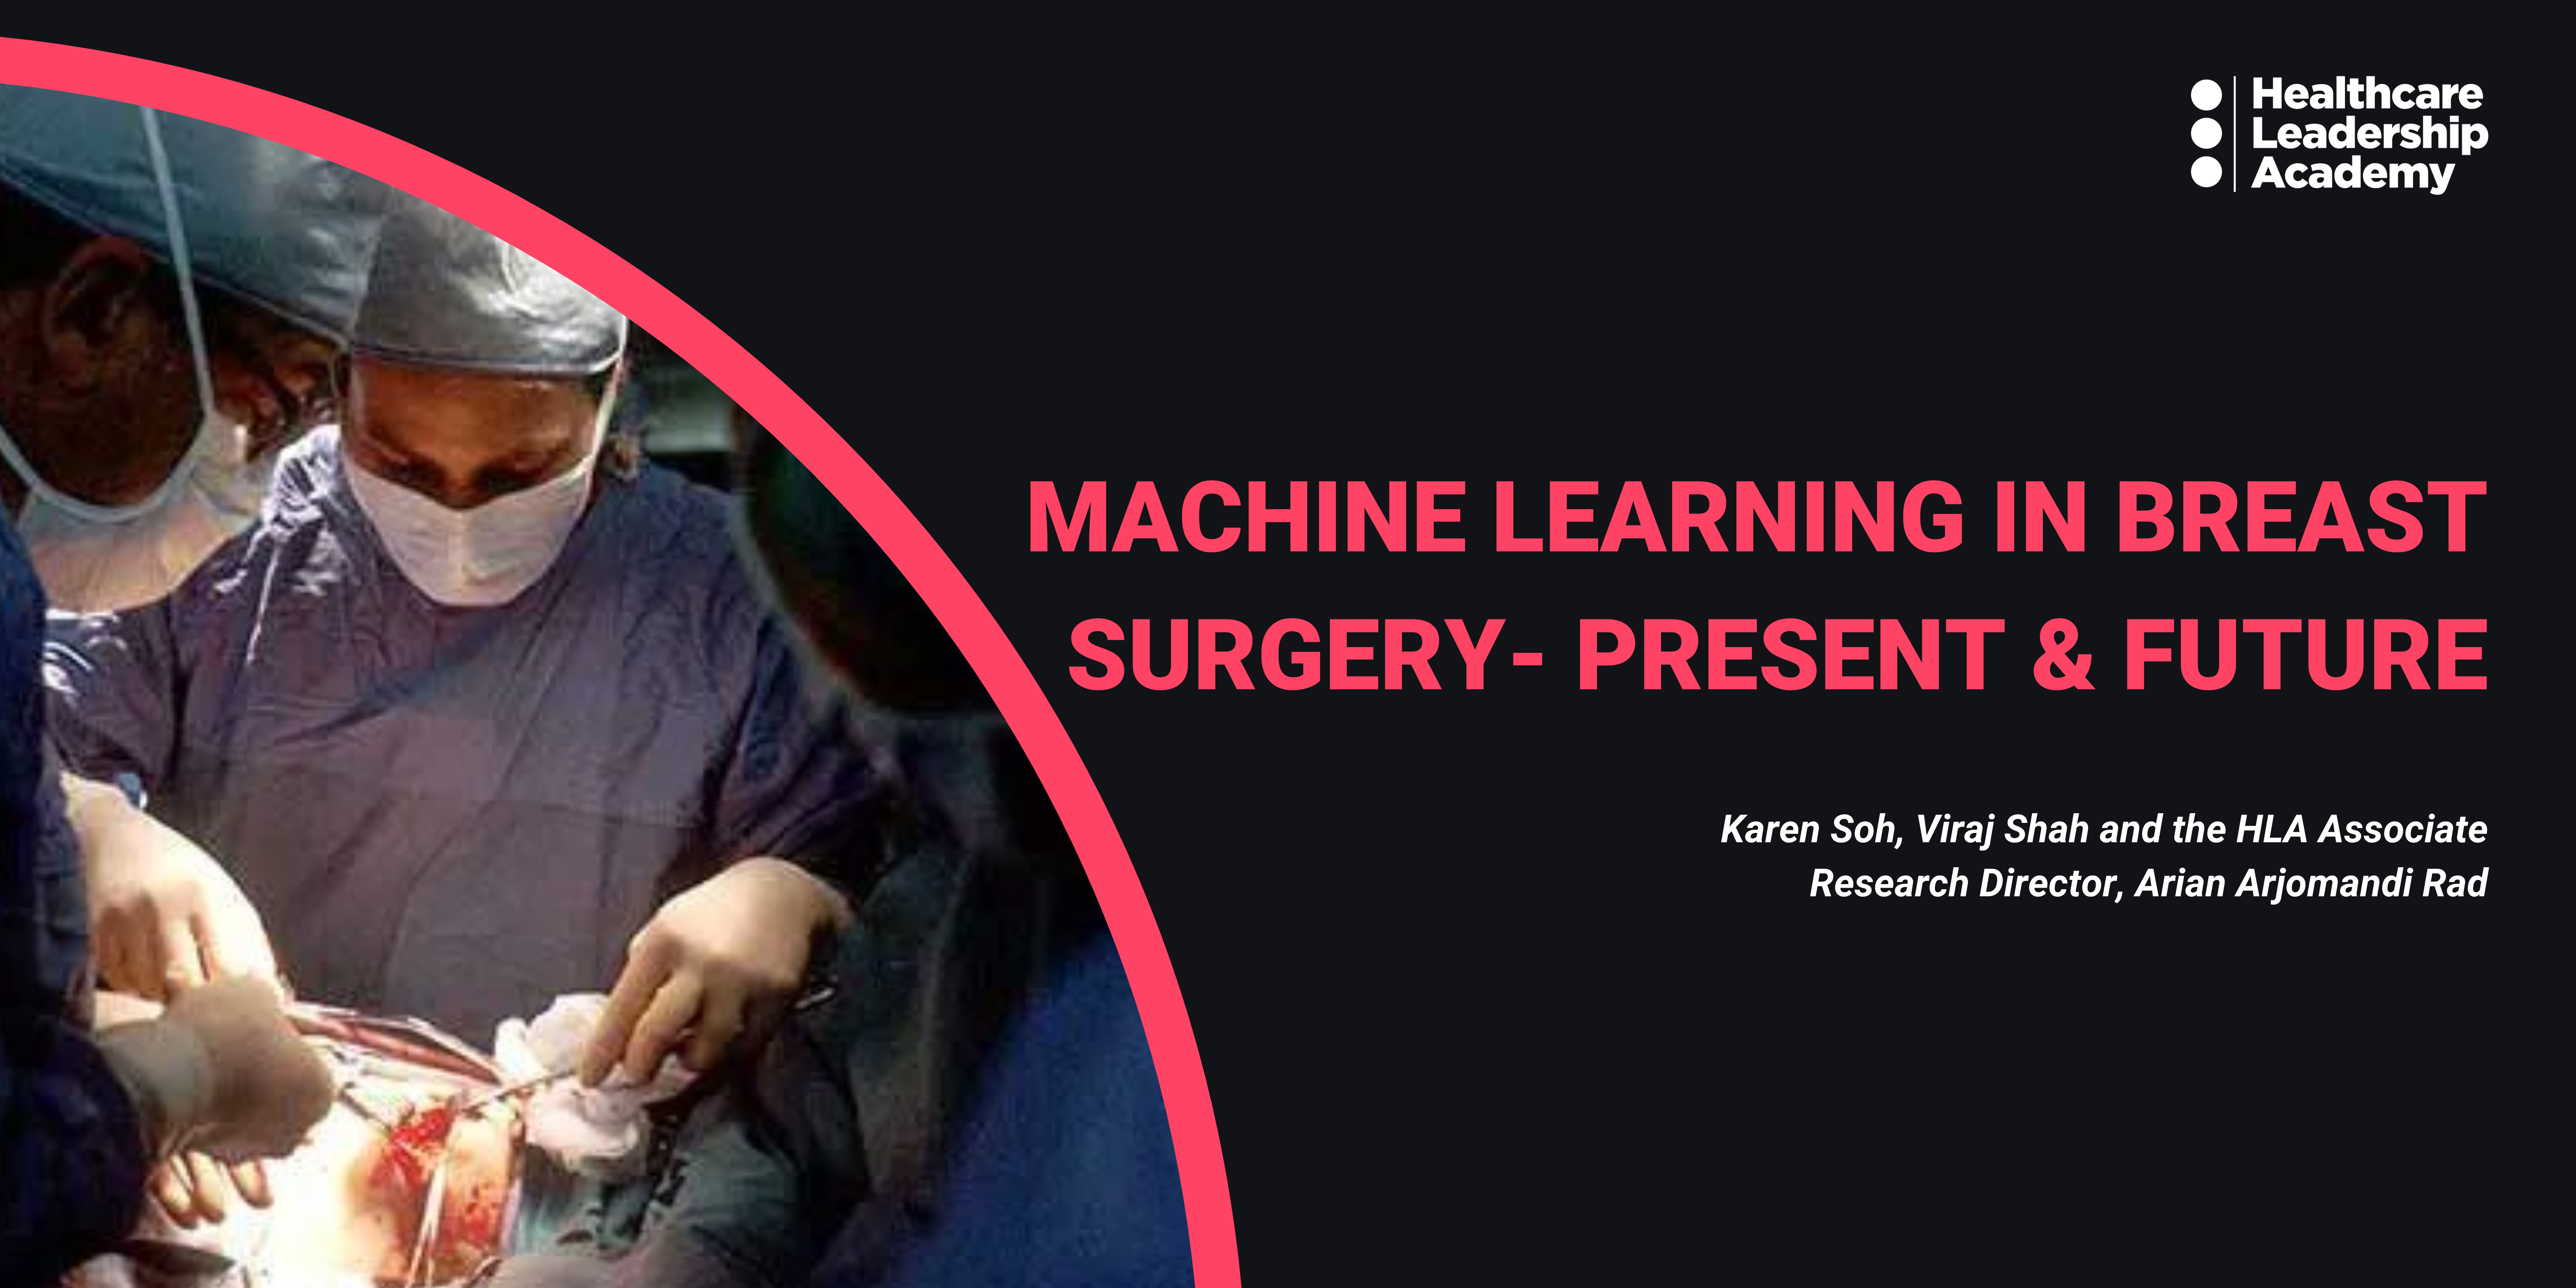 Machine Learning in Breast Surgery- Present & Future